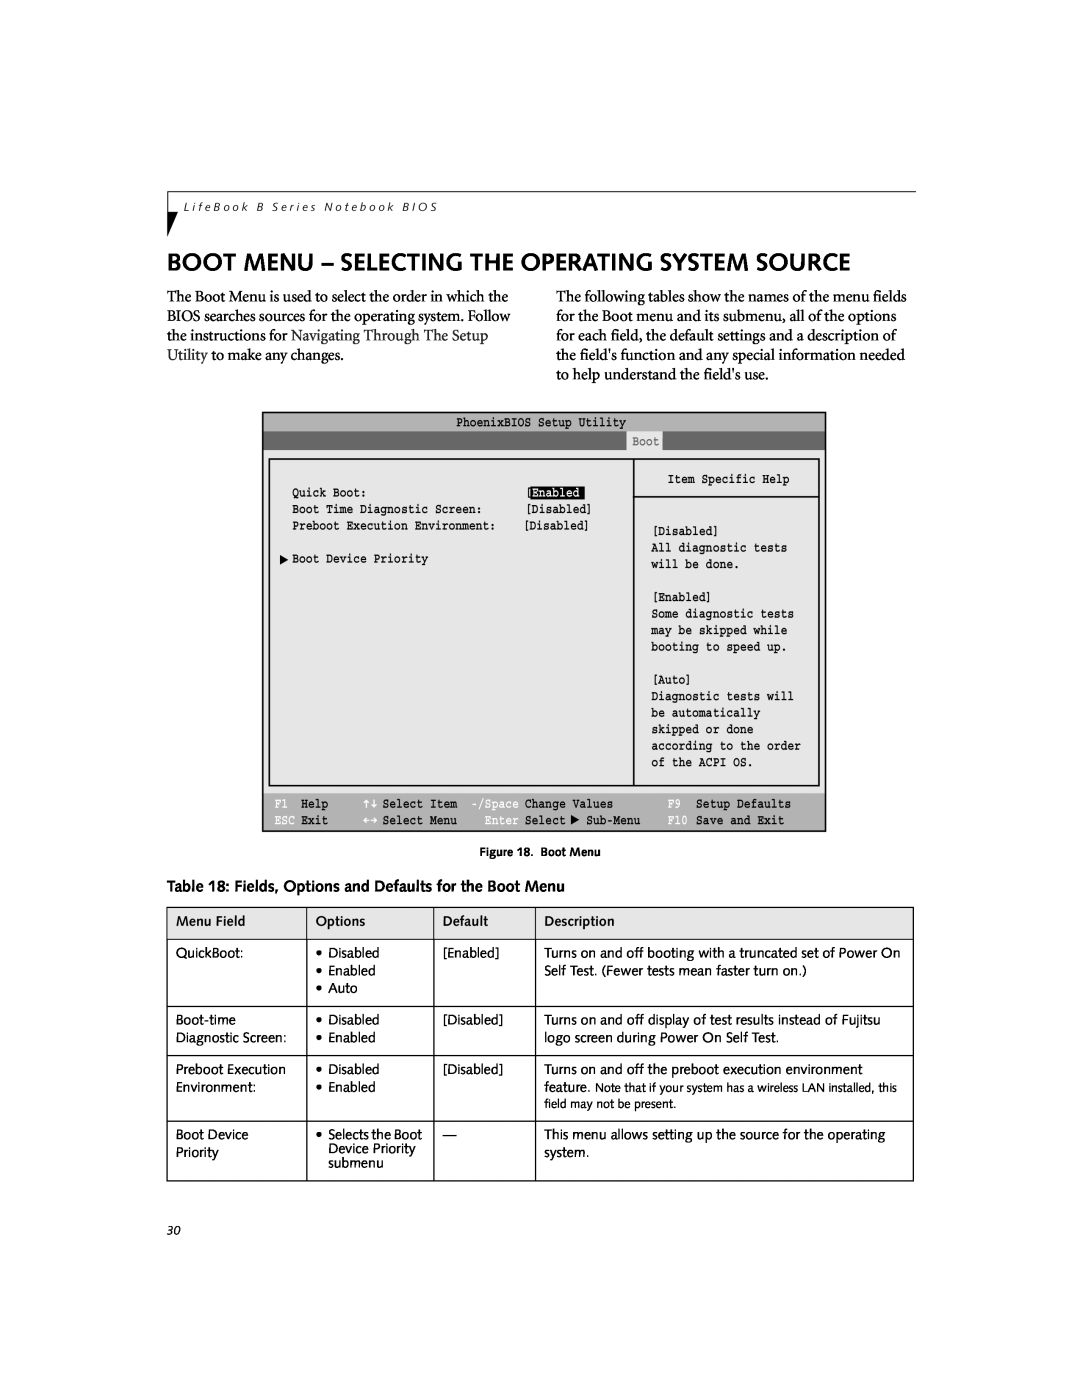 Fujitsu B2620 manual Boot Menu - Selecting The Operating System Source, Fields, Options and Defaults for the Boot Menu 